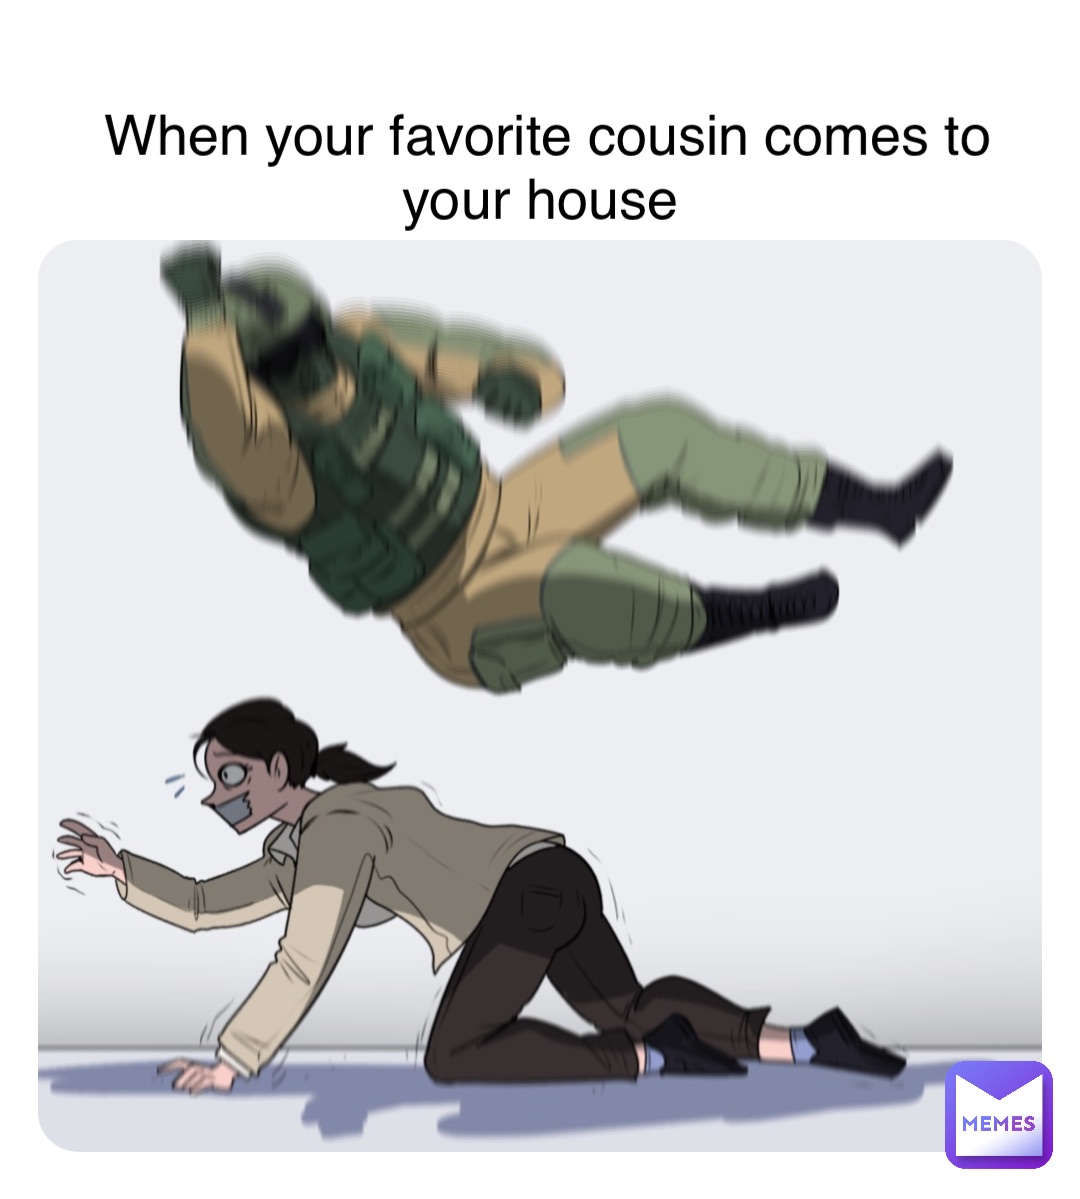 When your favorite cousin comes to your house